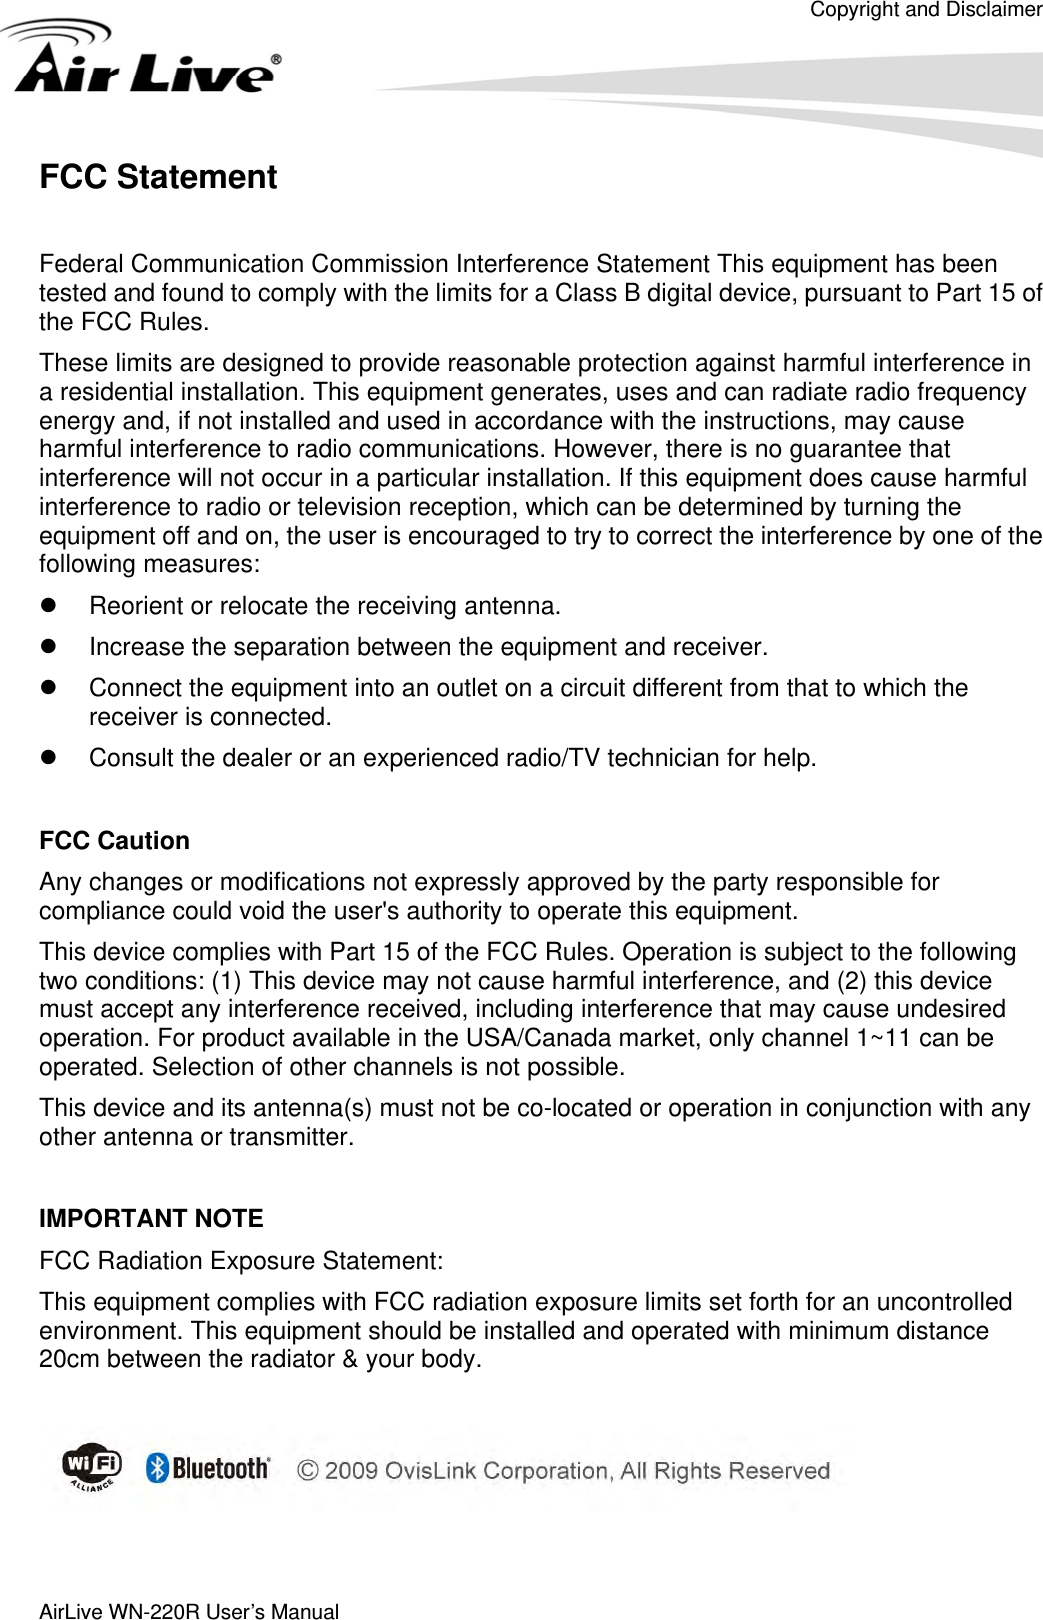 Copyright and Disclaimer  AirLive WN-220R User’s Manual    FCC Statement  Federal Communication Commission Interference Statement This equipment has been tested and found to comply with the limits for a Class B digital device, pursuant to Part 15 of the FCC Rules. These limits are designed to provide reasonable protection against harmful interference in a residential installation. This equipment generates, uses and can radiate radio frequency energy and, if not installed and used in accordance with the instructions, may cause harmful interference to radio communications. However, there is no guarantee that interference will not occur in a particular installation. If this equipment does cause harmful interference to radio or television reception, which can be determined by turning the equipment off and on, the user is encouraged to try to correct the interference by one of the following measures: z  Reorient or relocate the receiving antenna. z  Increase the separation between the equipment and receiver. z  Connect the equipment into an outlet on a circuit different from that to which the receiver is connected. z  Consult the dealer or an experienced radio/TV technician for help.  FCC Caution Any changes or modifications not expressly approved by the party responsible for compliance could void the user&apos;s authority to operate this equipment. This device complies with Part 15 of the FCC Rules. Operation is subject to the following two conditions: (1) This device may not cause harmful interference, and (2) this device must accept any interference received, including interference that may cause undesired operation. For product available in the USA/Canada market, only channel 1~11 can be operated. Selection of other channels is not possible. This device and its antenna(s) must not be co-located or operation in conjunction with any other antenna or transmitter.  IMPORTANT NOTE FCC Radiation Exposure Statement: This equipment complies with FCC radiation exposure limits set forth for an uncontrolled environment. This equipment should be installed and operated with minimum distance 20cm between the radiator &amp; your body.    